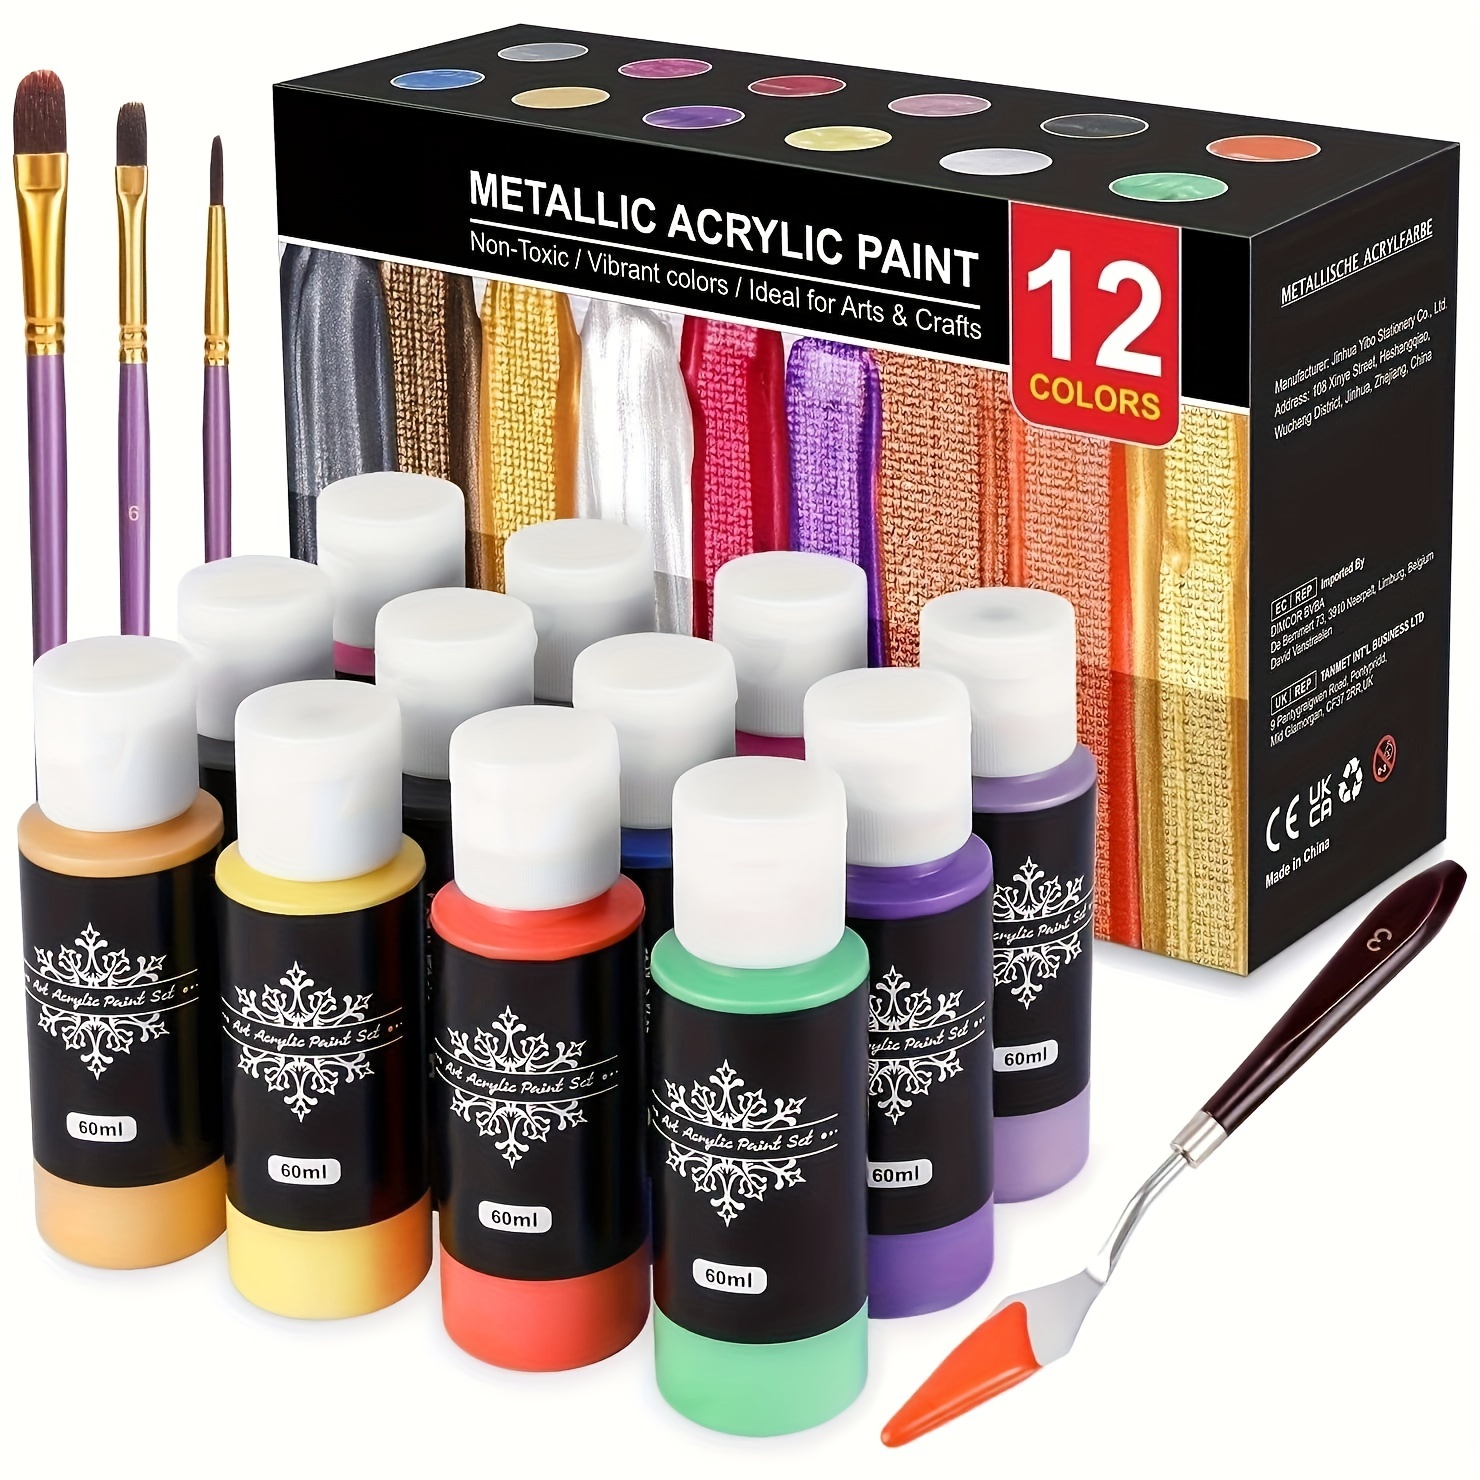 Airbrush Paint Set - 26 Colors Airbrush Paint, Ready to Spray, Water Based  Acrylic Airbrush Paint Kit for Metal, Plastic Models, Leather - 0.7fl oz